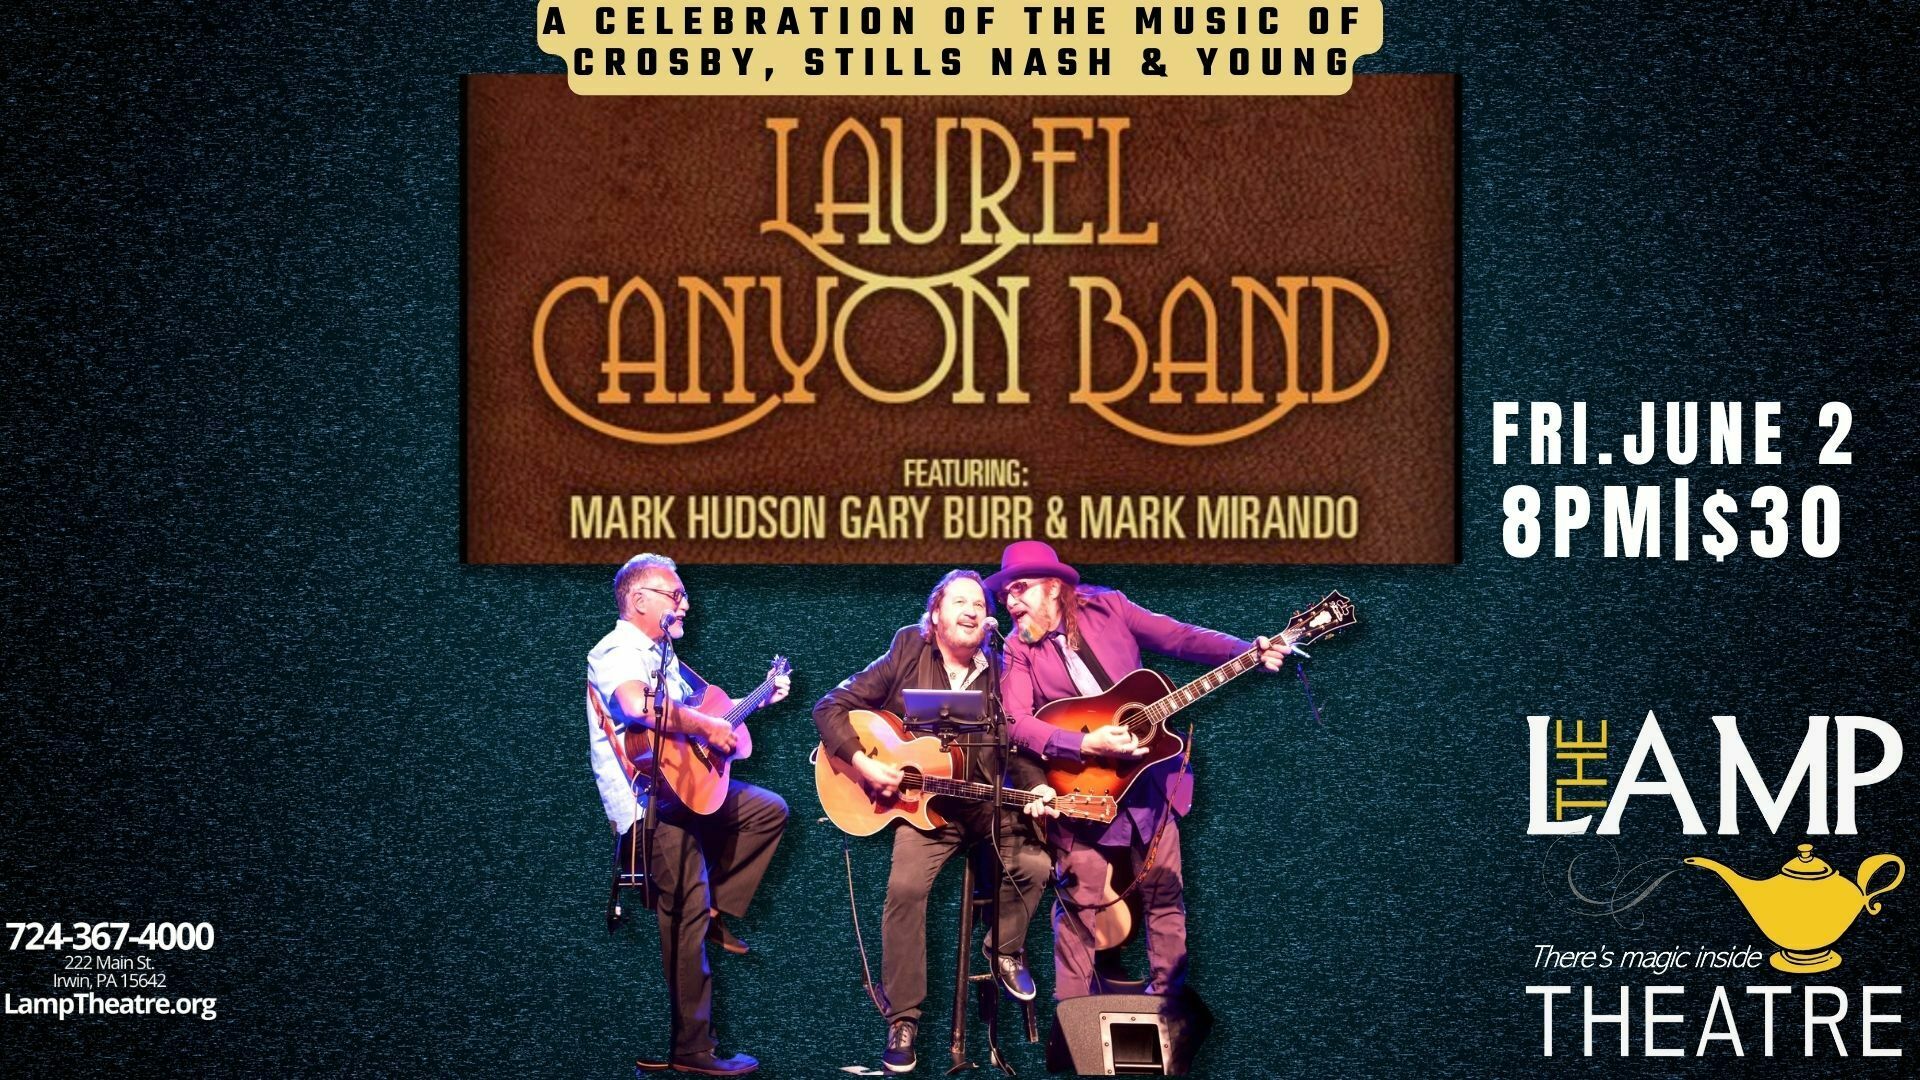 Laurel Canyon Band: a tribute to Crosby, Stills, Nash and Young, Irwin, Pennsylvania, United States